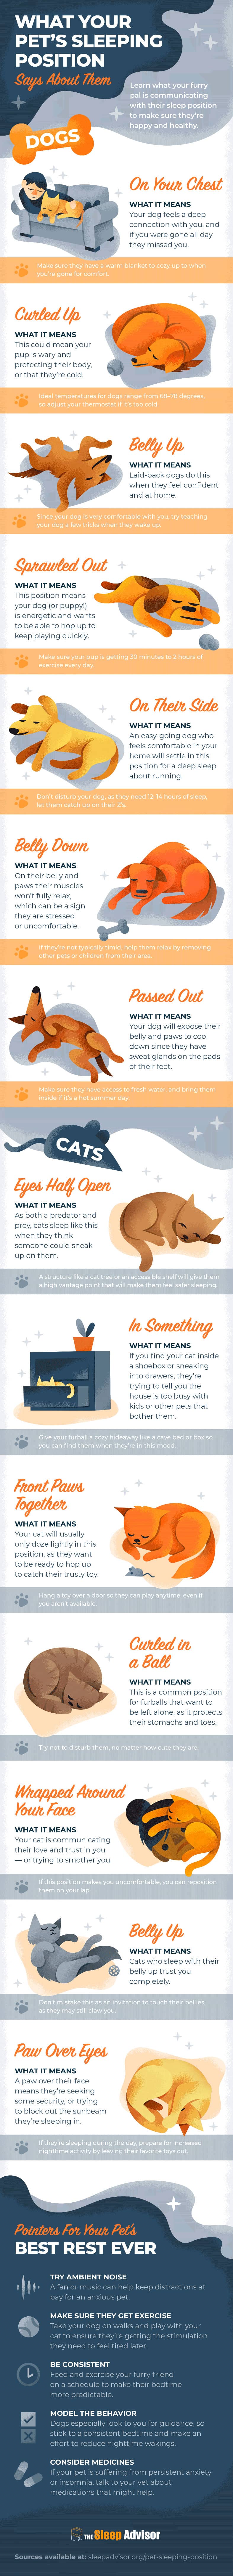 Infographic Showing What Pet's Sleeping Position Tells about Them